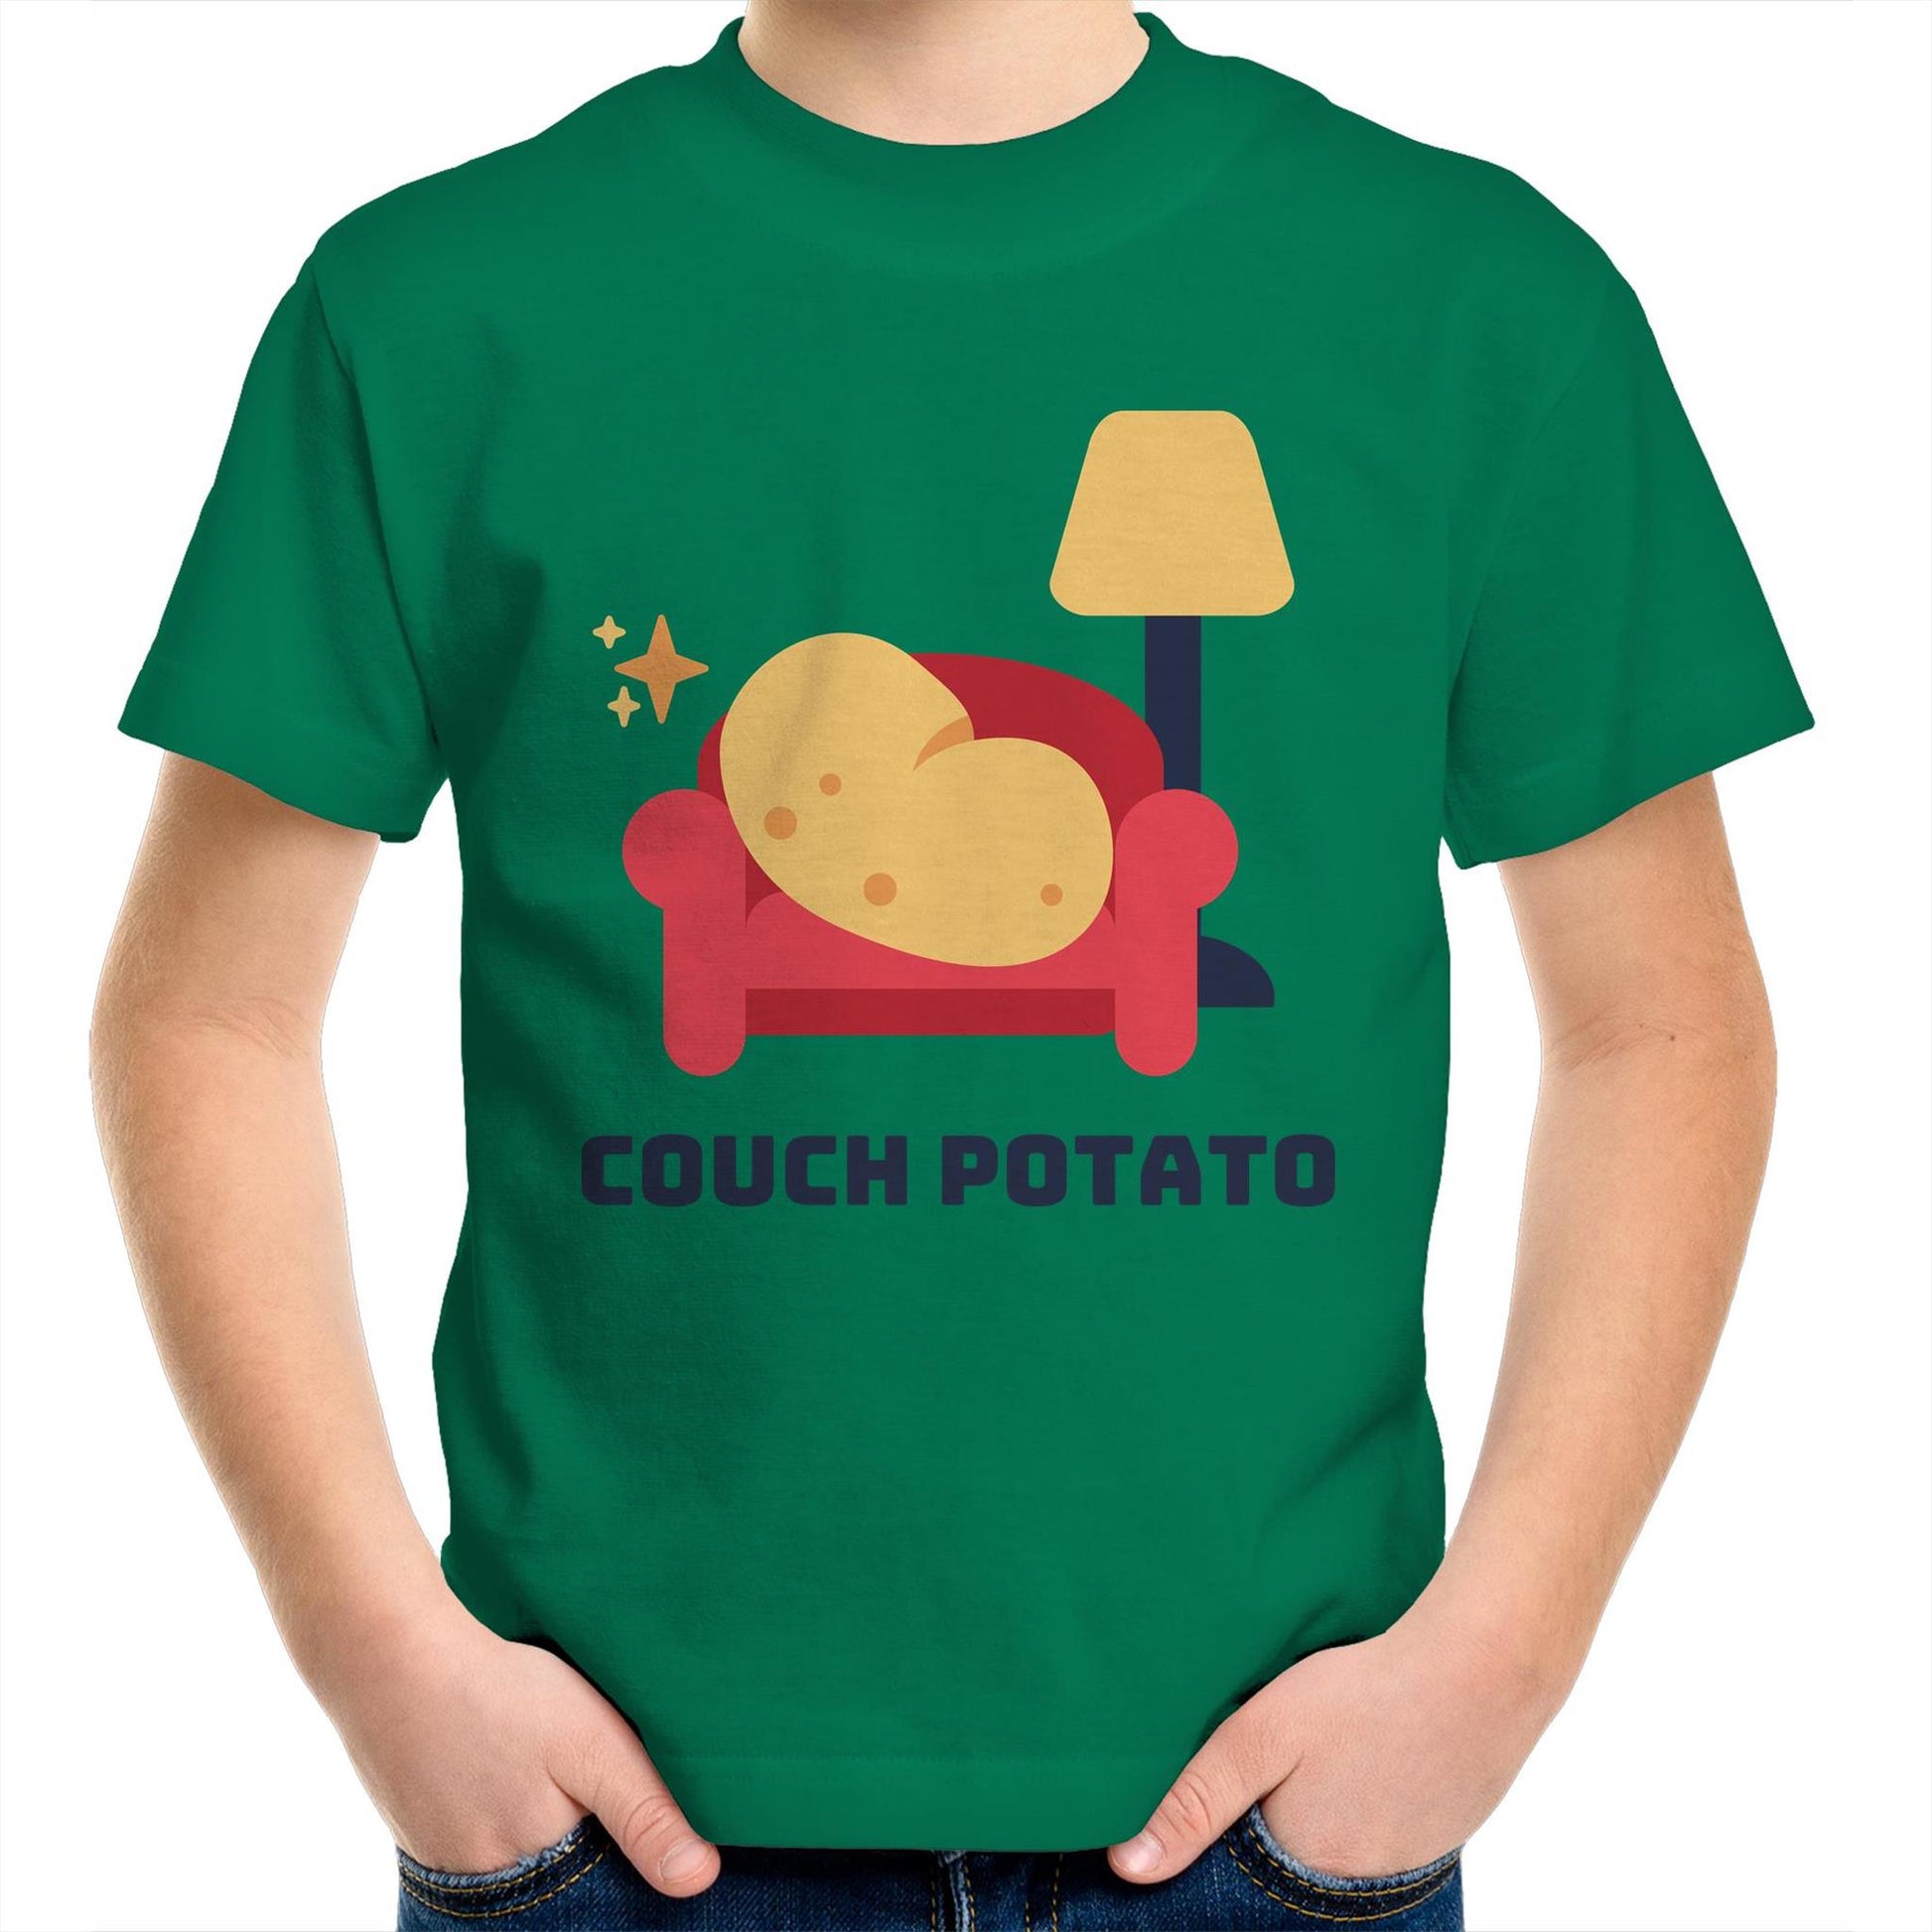 Couch Potato - Kids Youth Crew T-Shirt Kelly Green Kids Youth T-shirt Funny